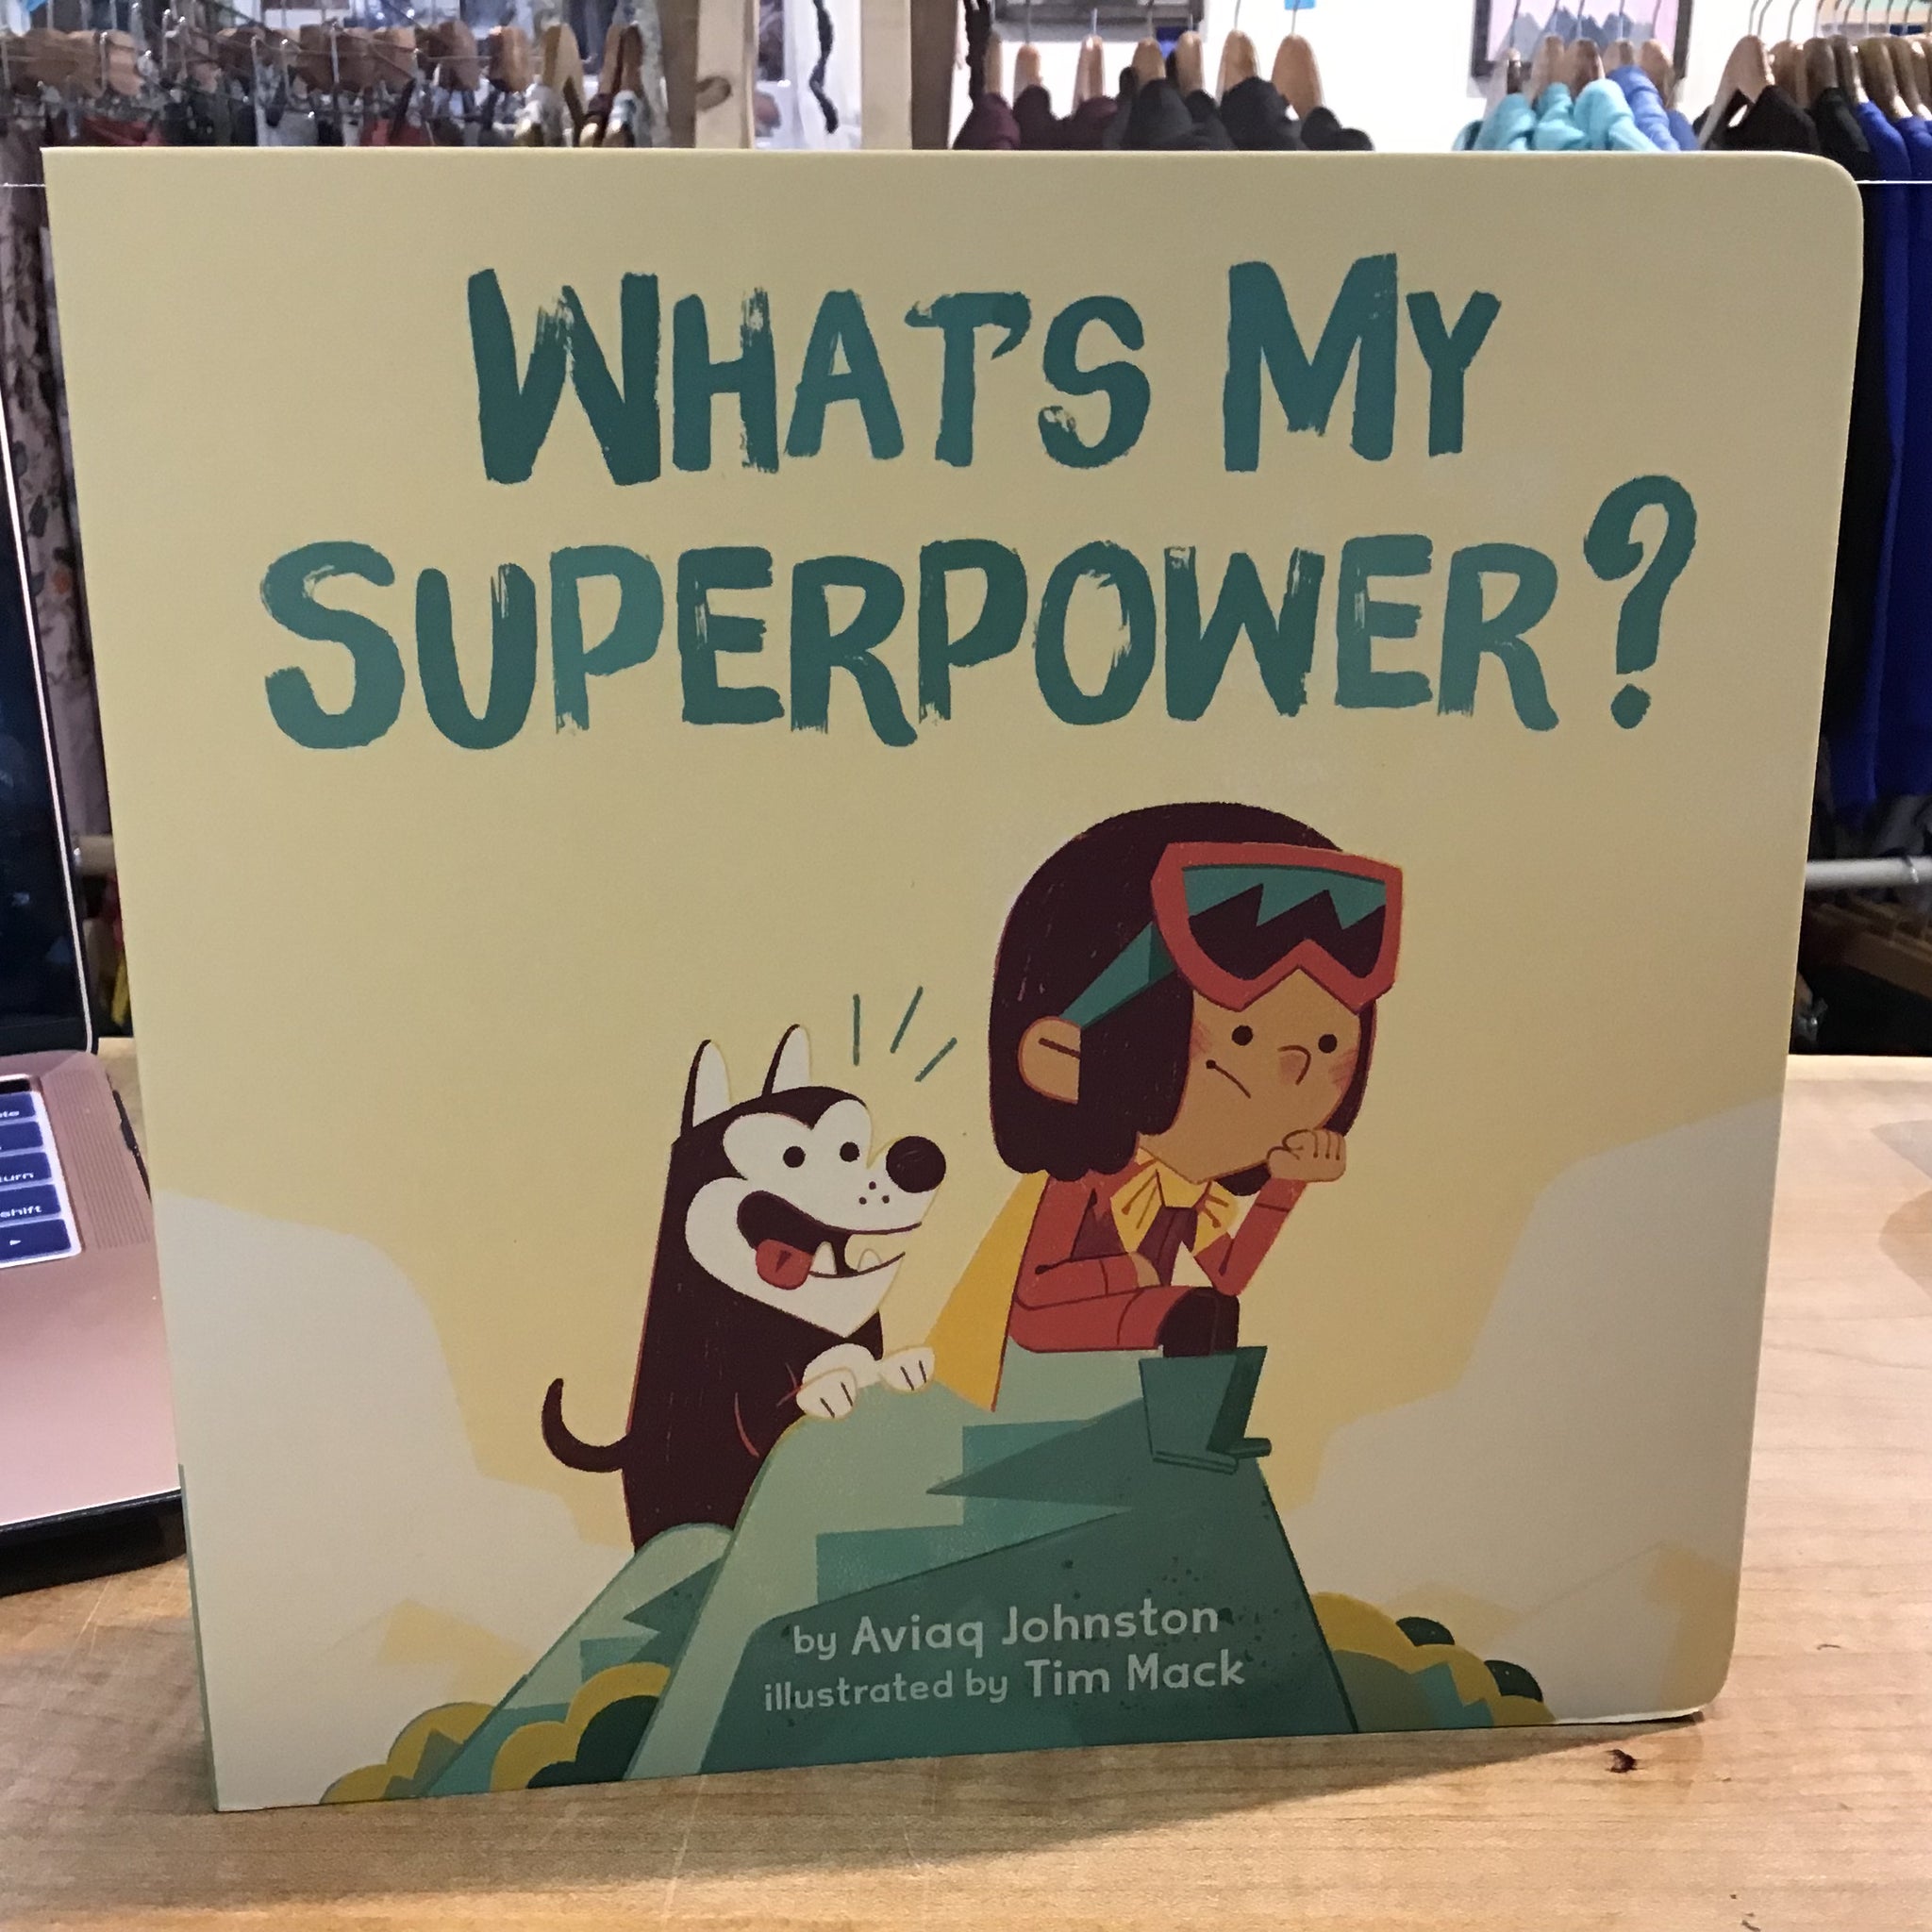 What's my superpower?